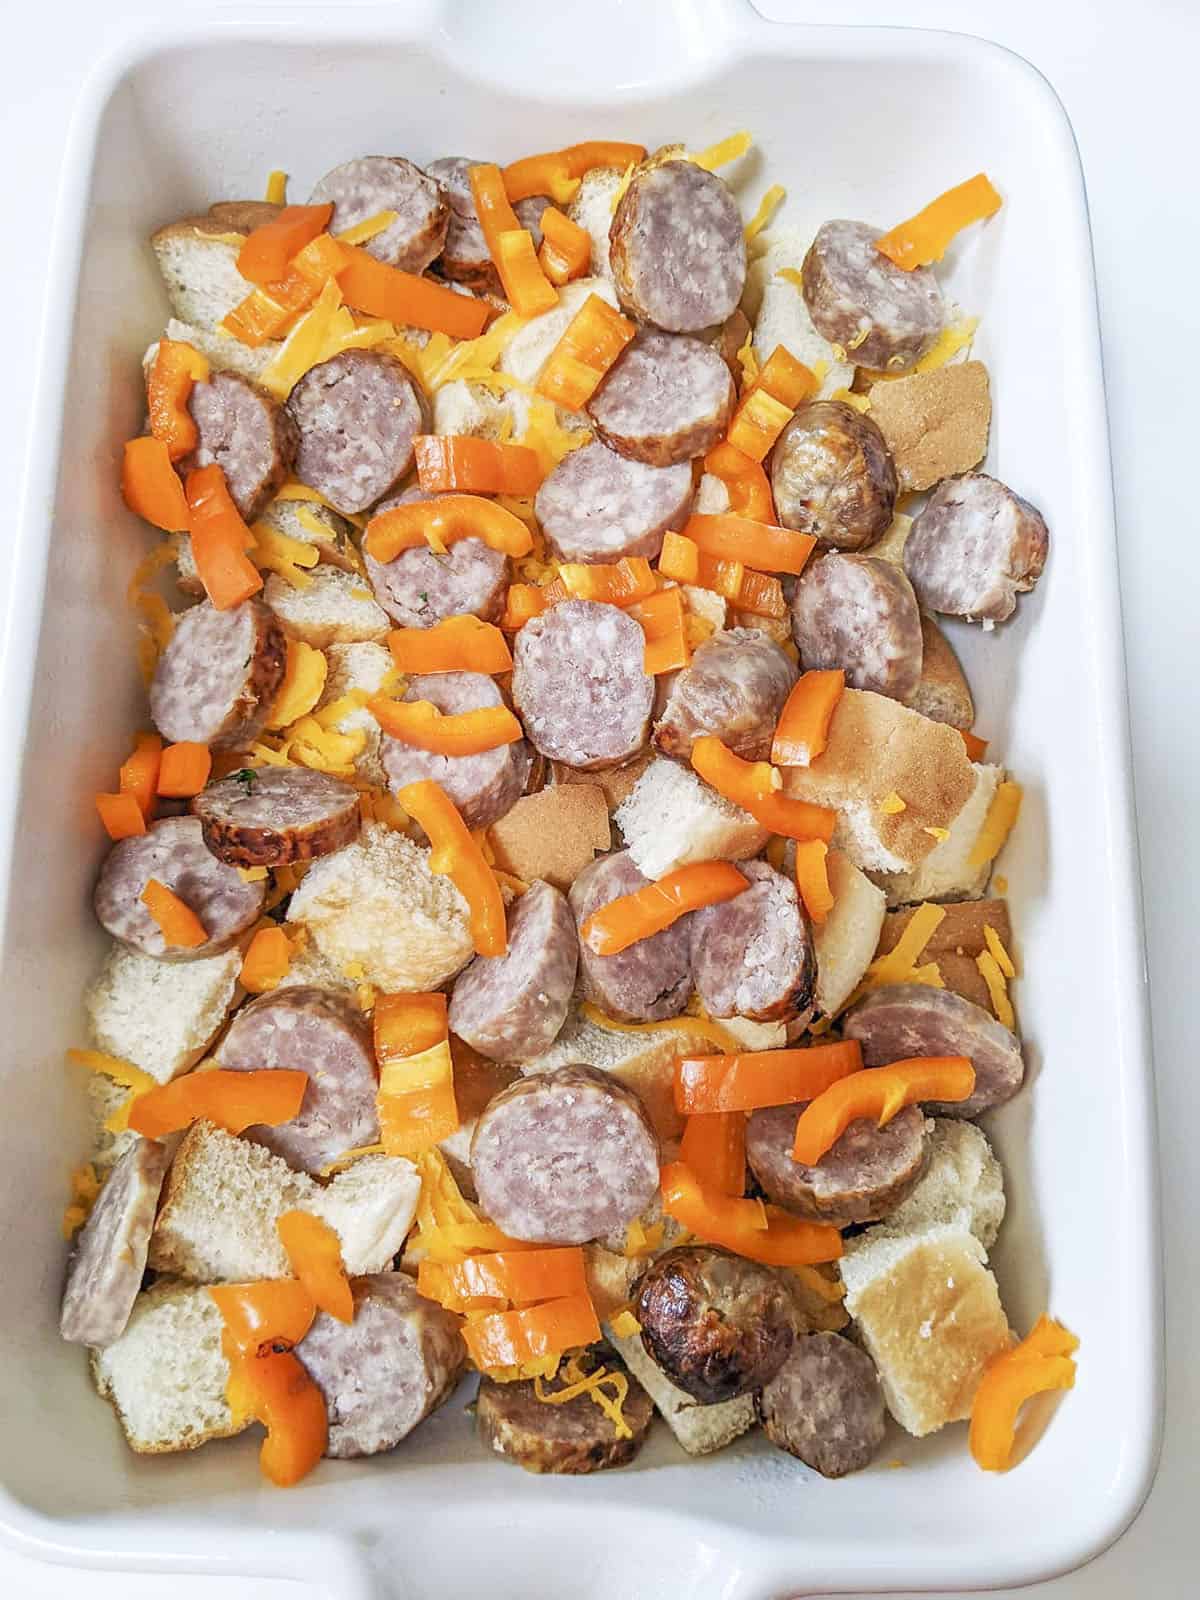 The dry ingredients such as sausage, bread, peppers and cheese in the casserole dish, waiting for the egg mixture.